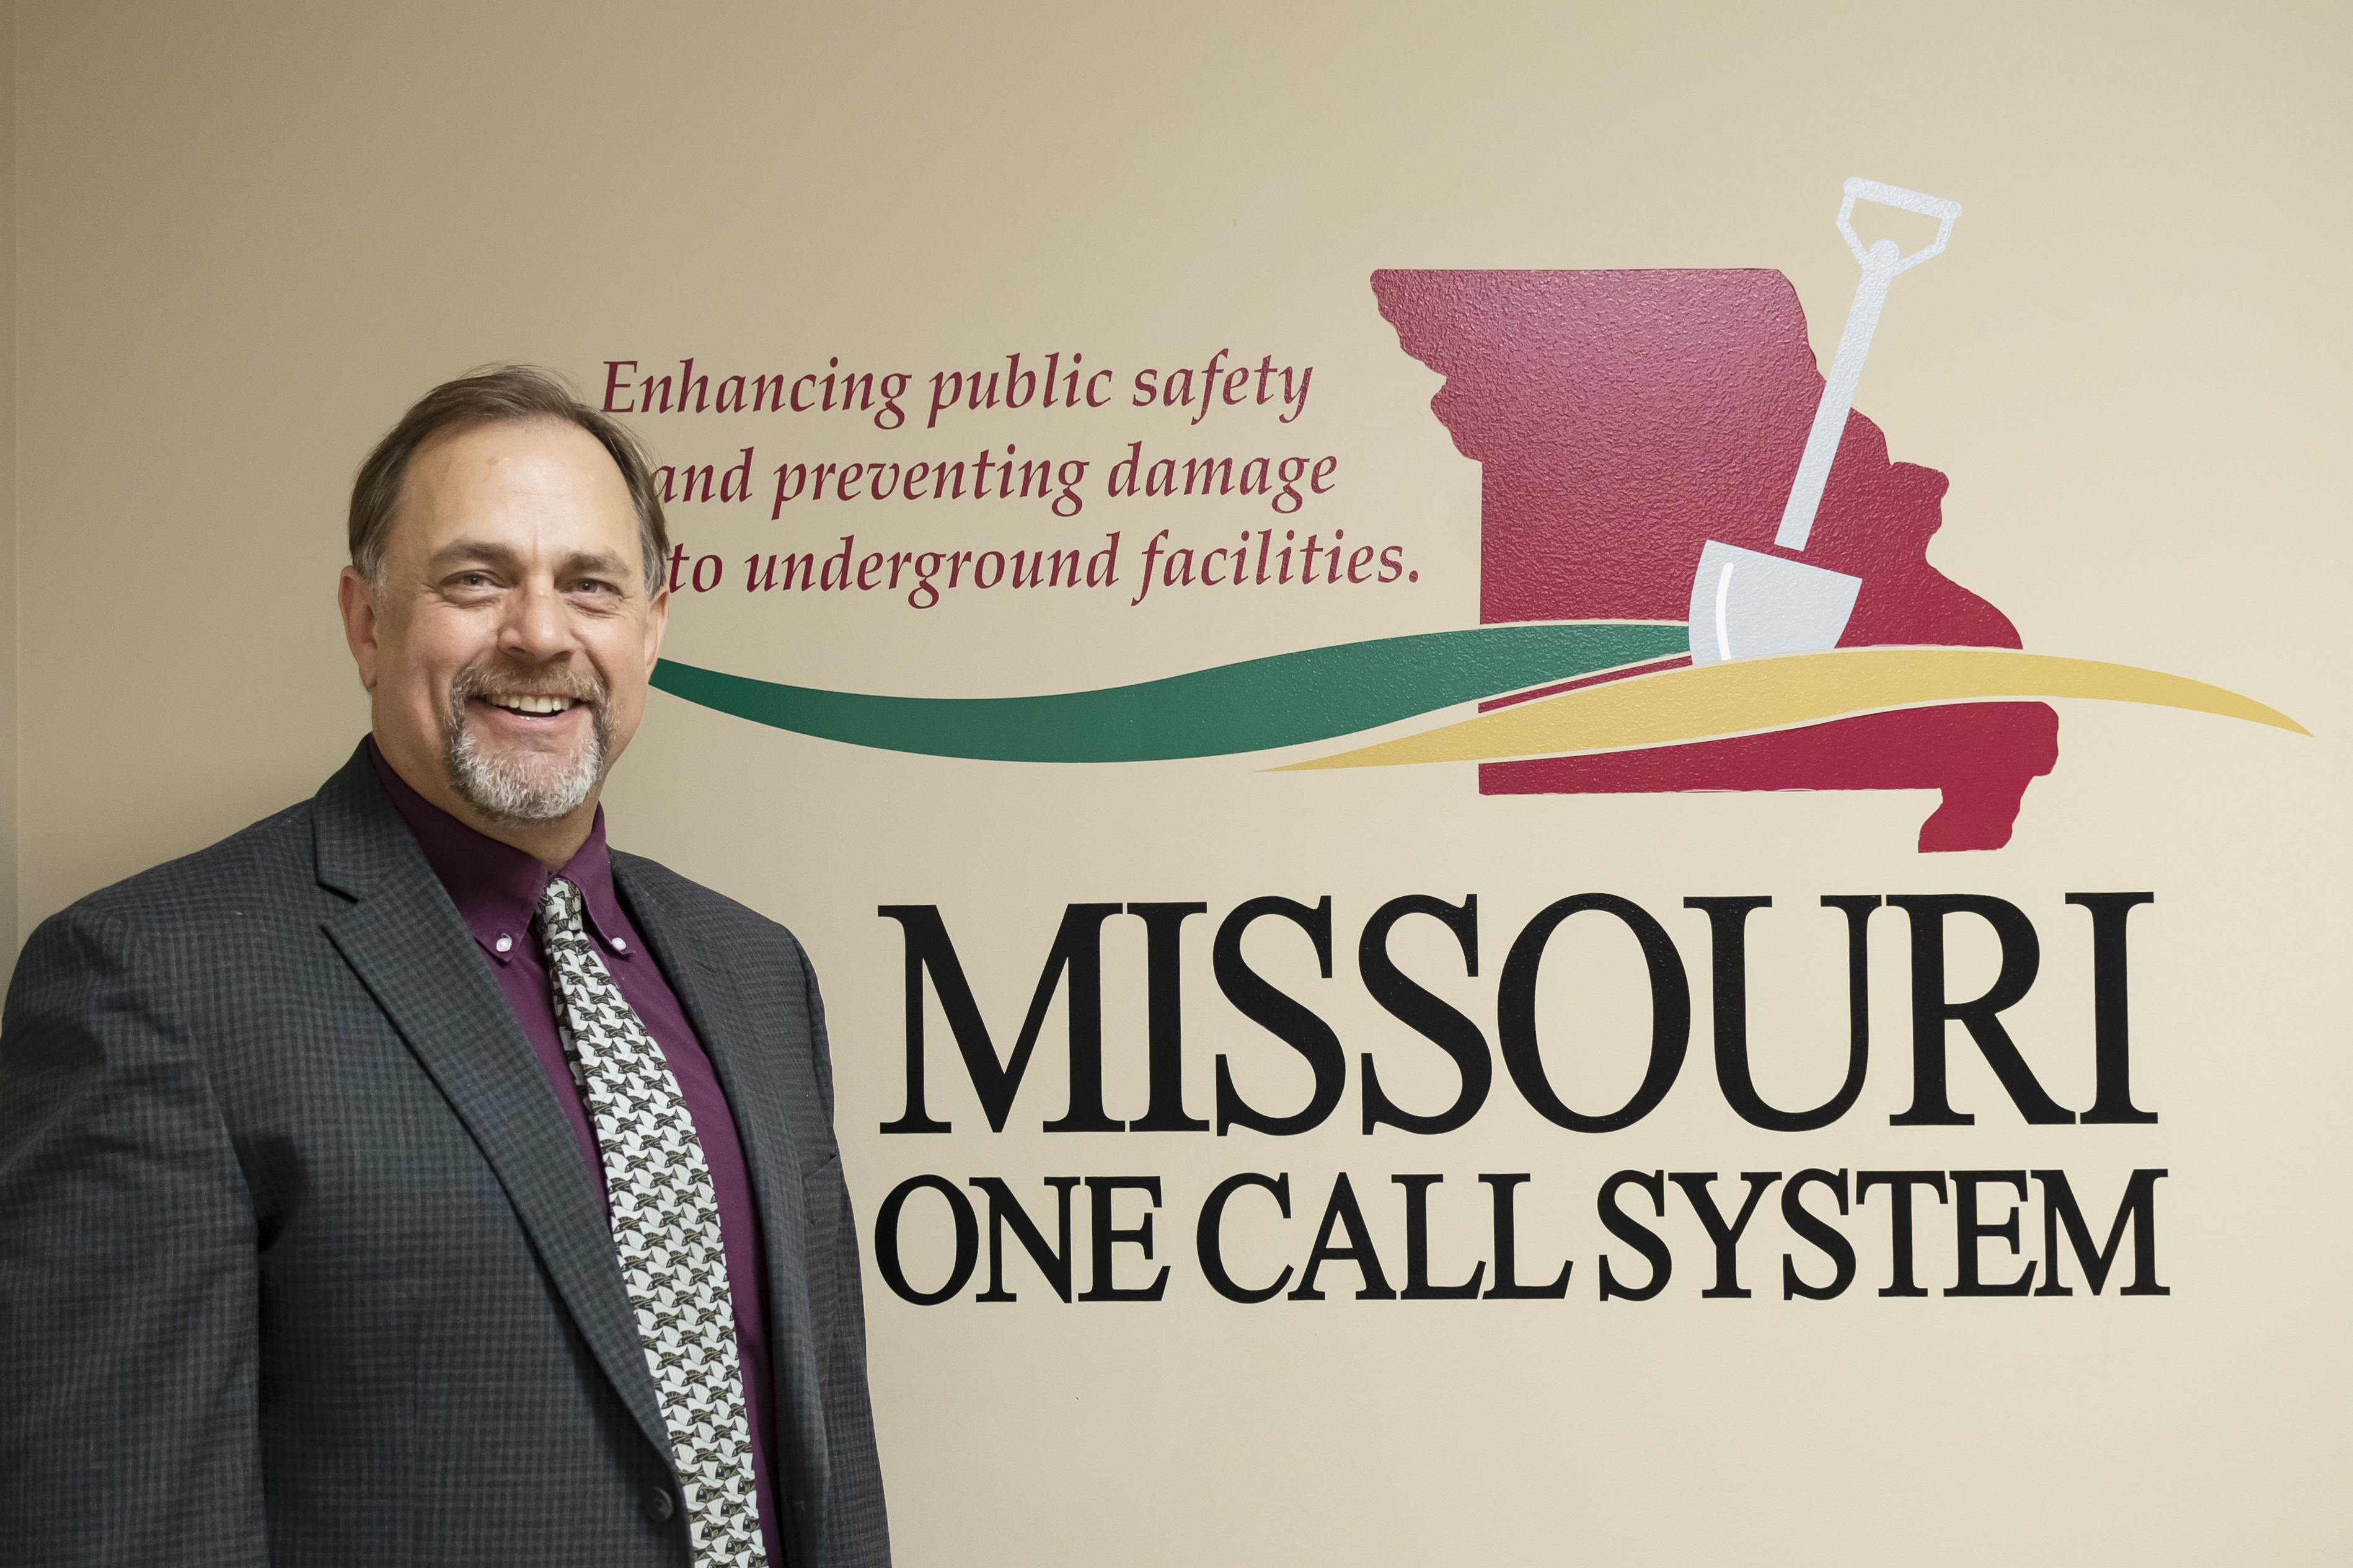 New Executive Director of Missouri One Call System